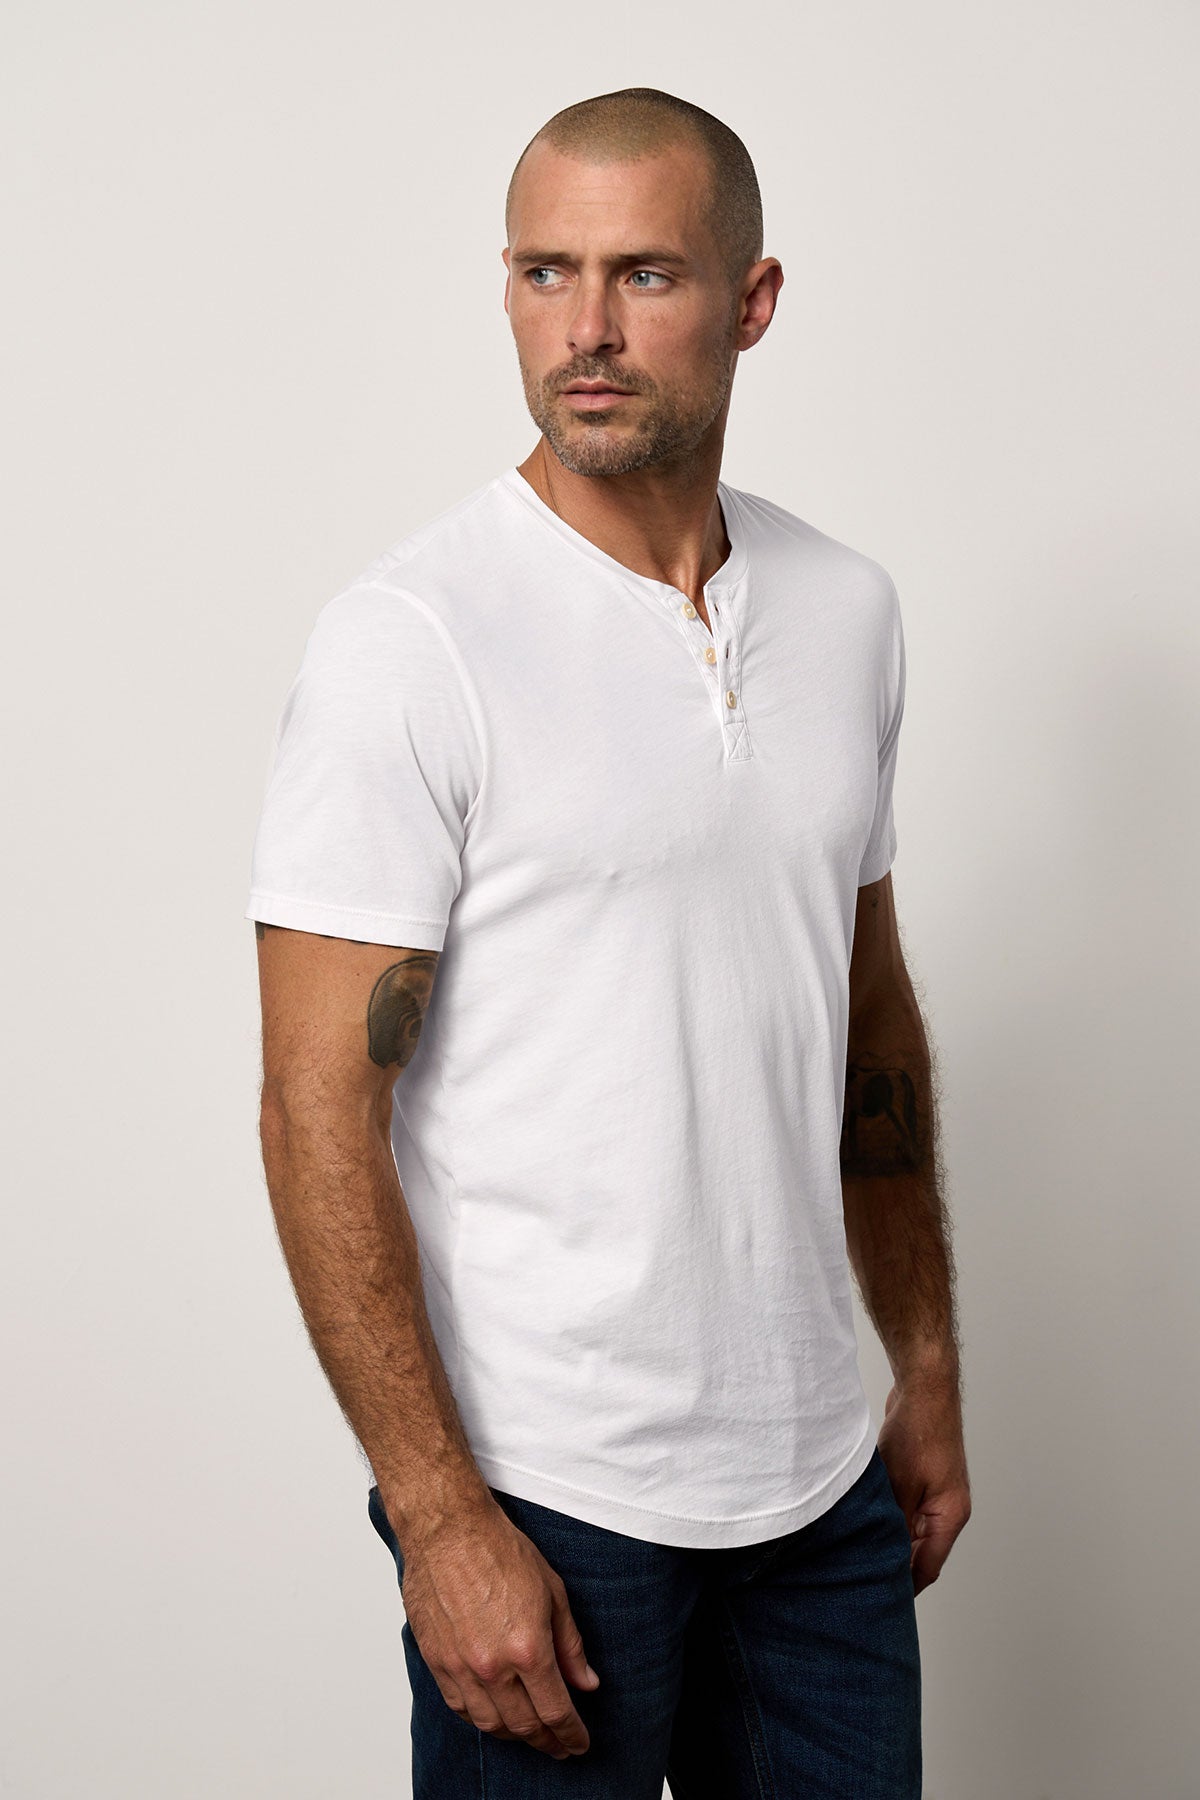   A man with a shaved head, wearing a white Velvet by Graham & Spencer Fulton Henley and dark jeans, stands against a plain background, looking to his left. 